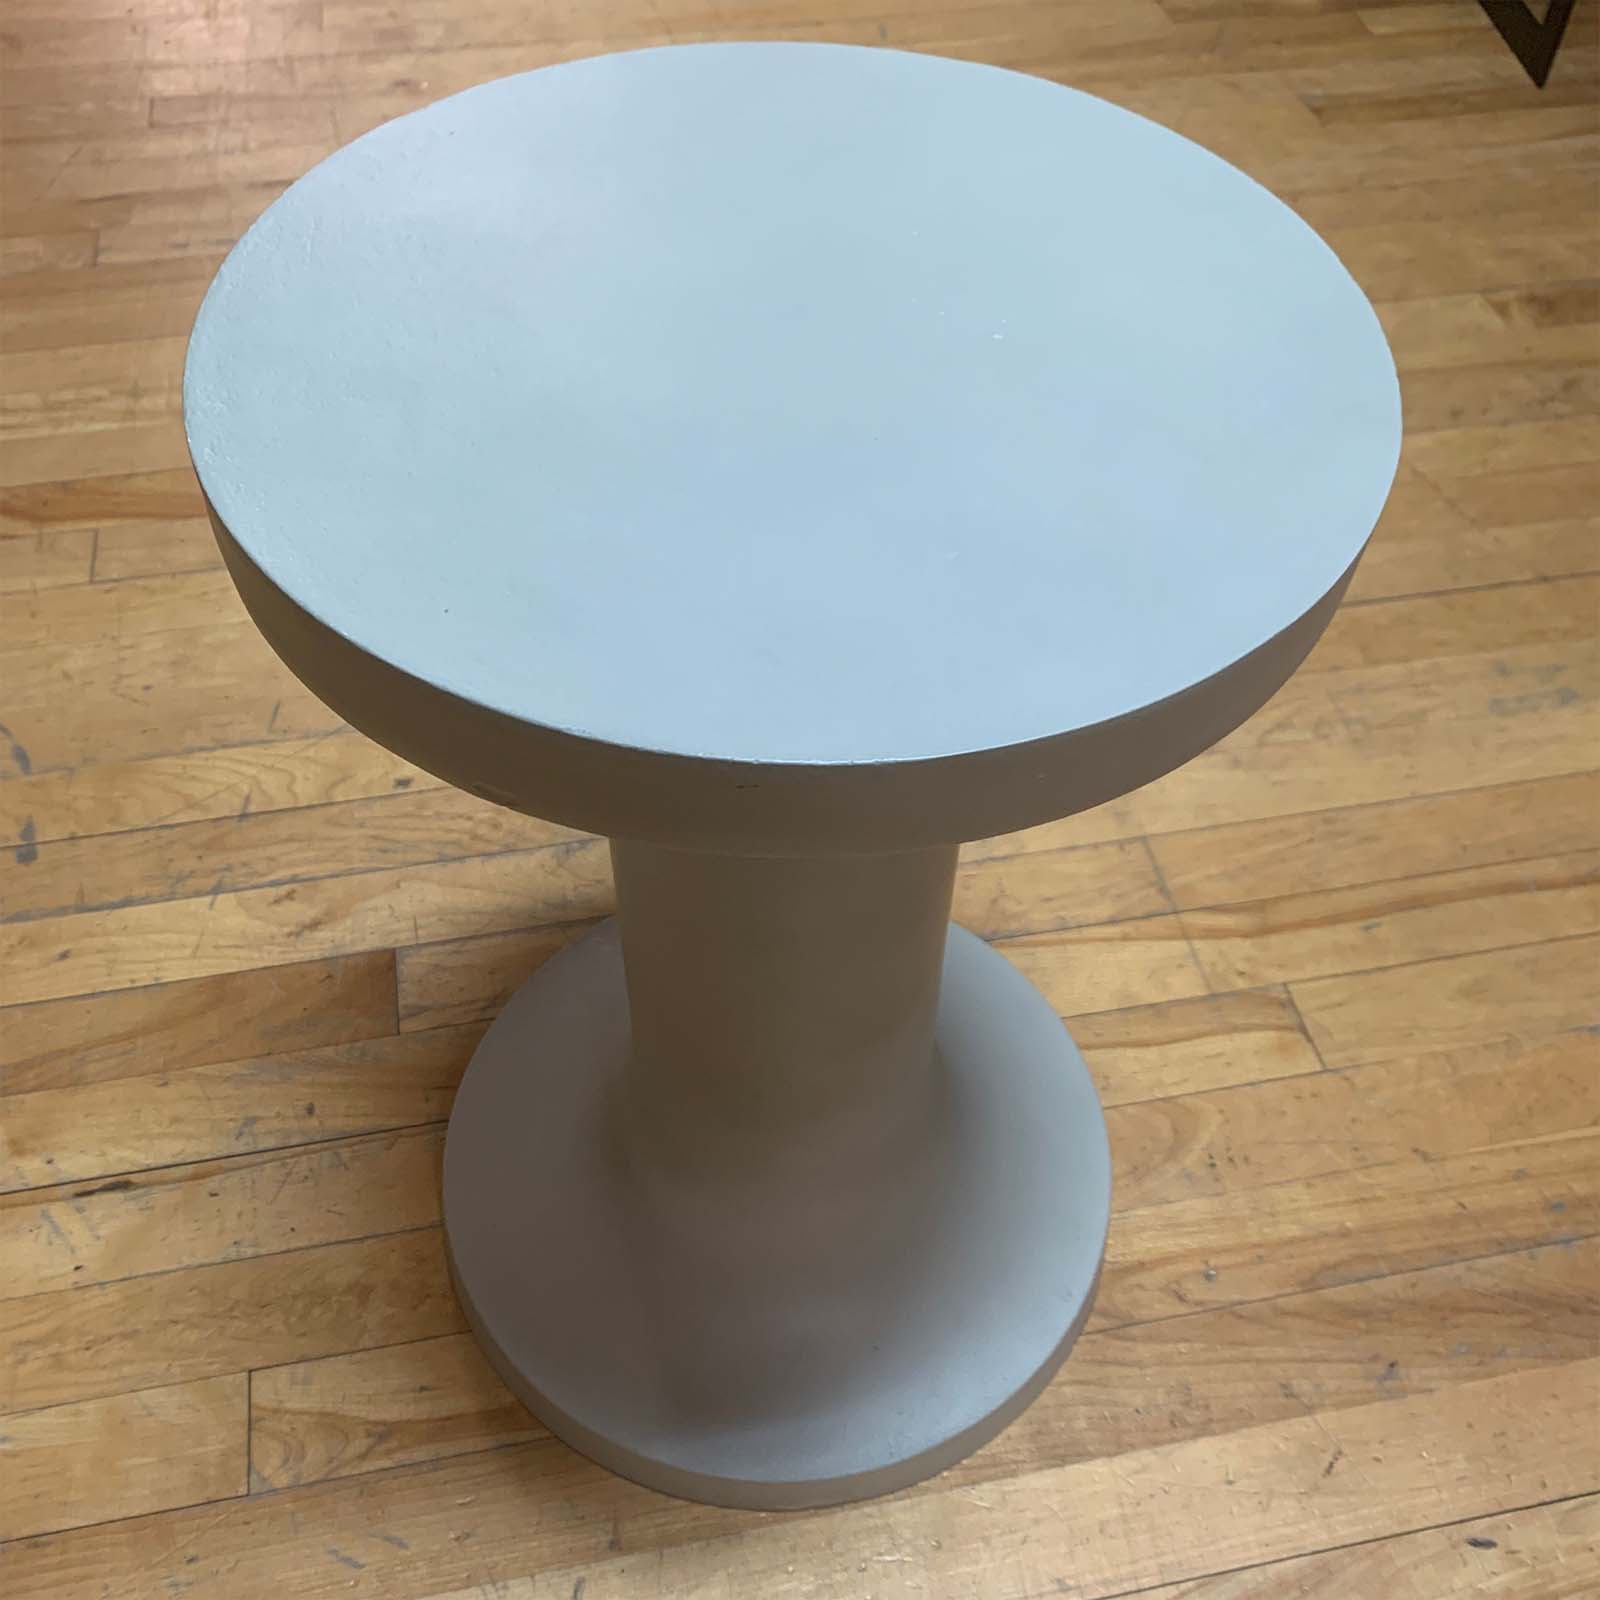 Gina End Table